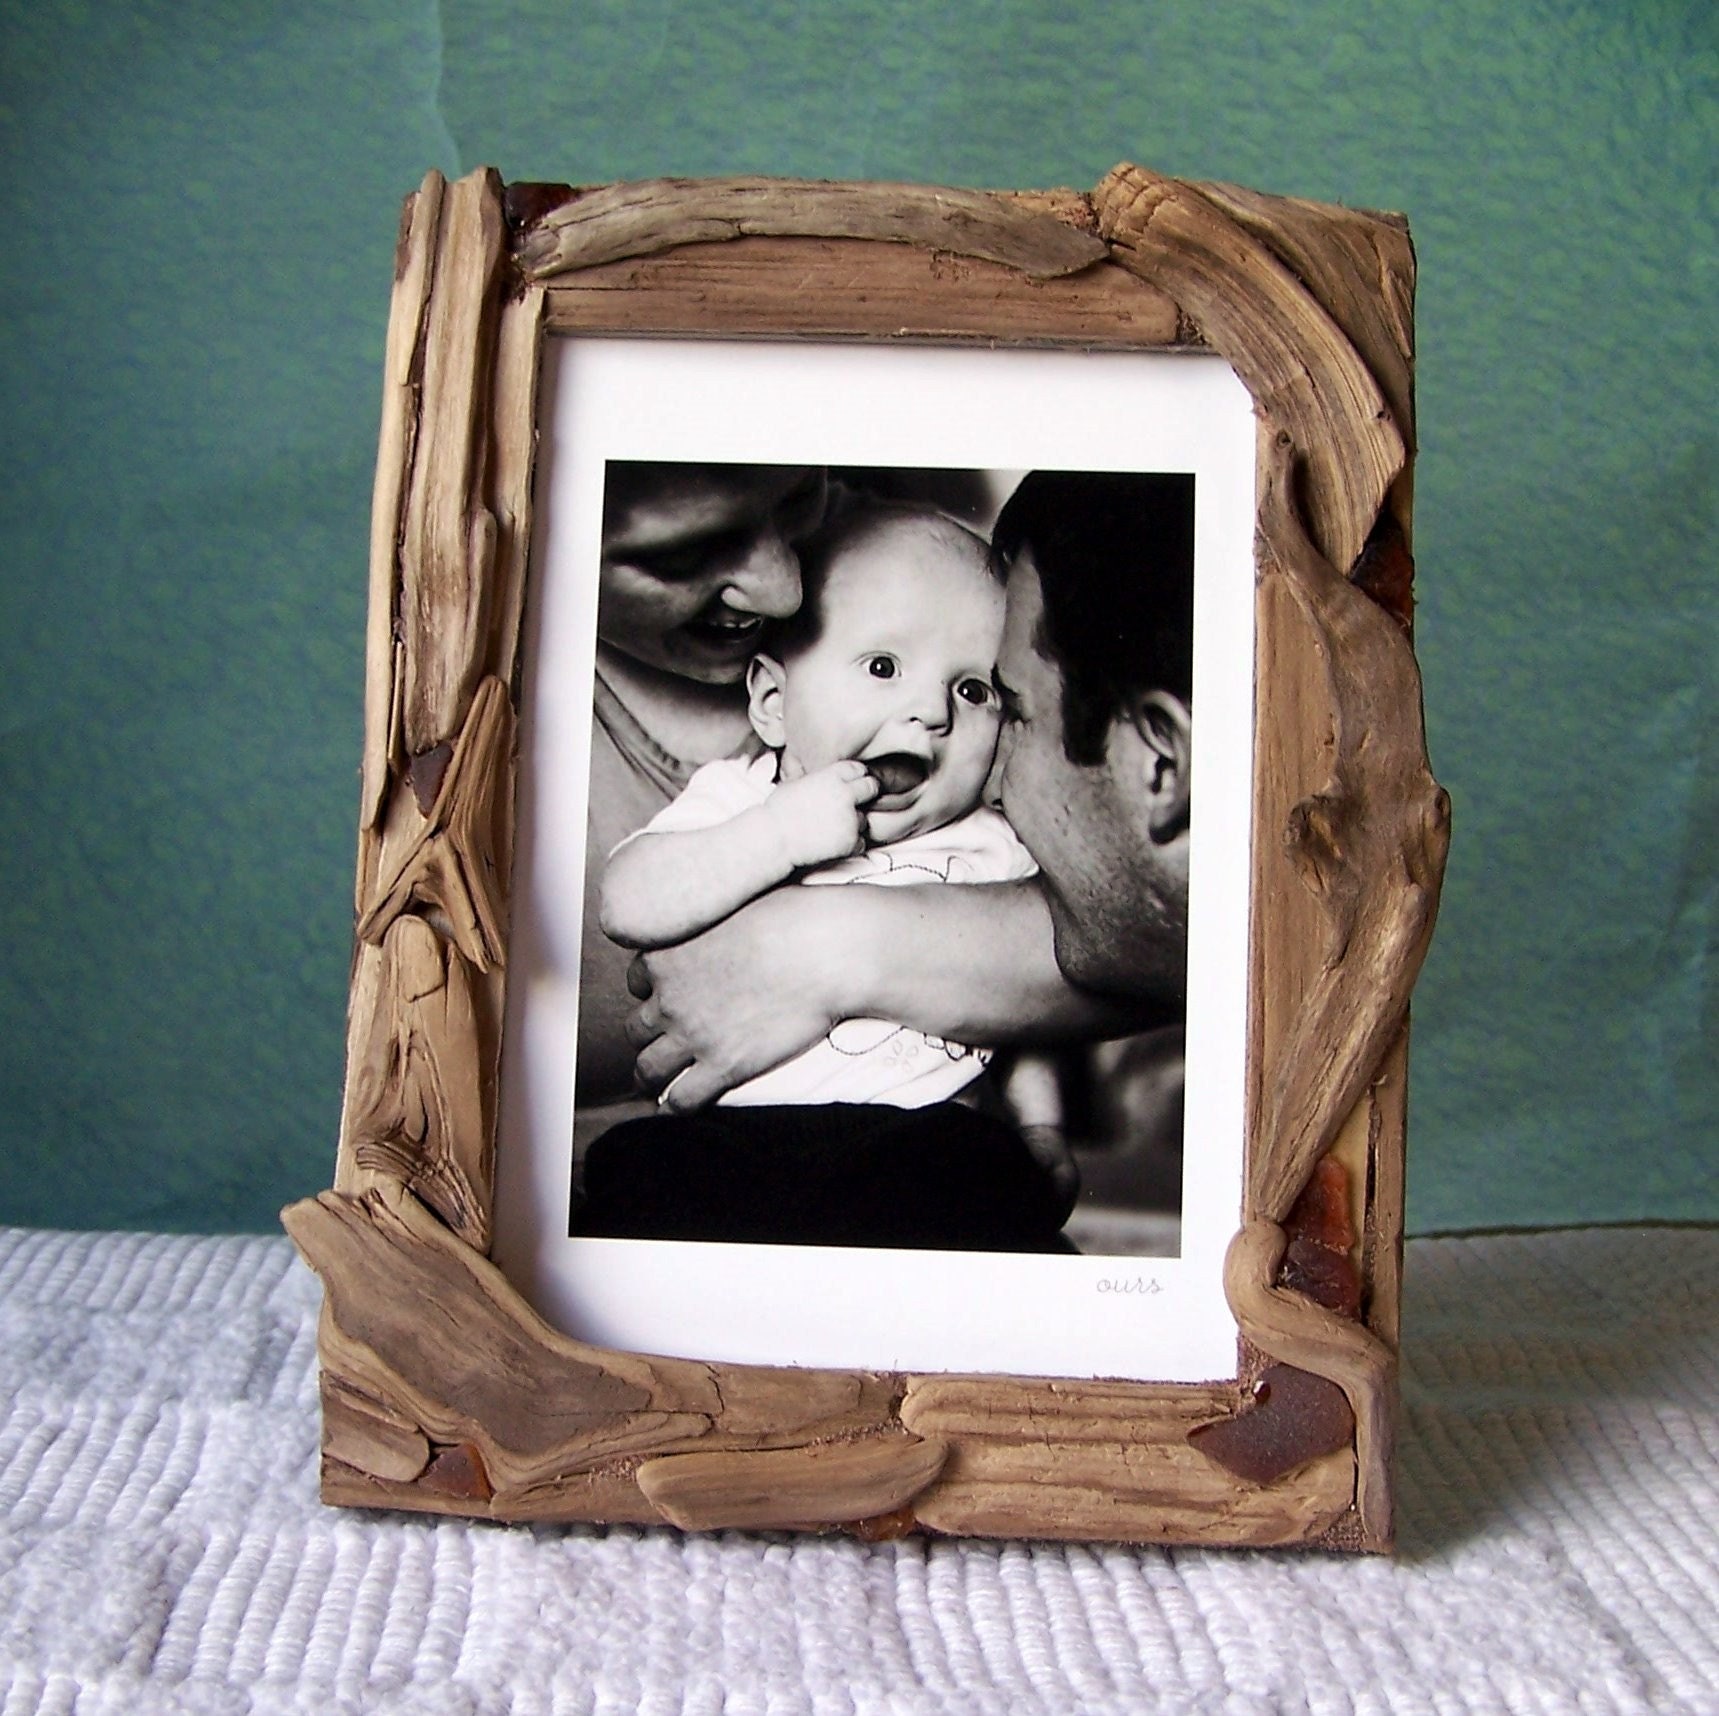 Driftwood Picture Frame 5 x 7 Curvy Brown Monochrome